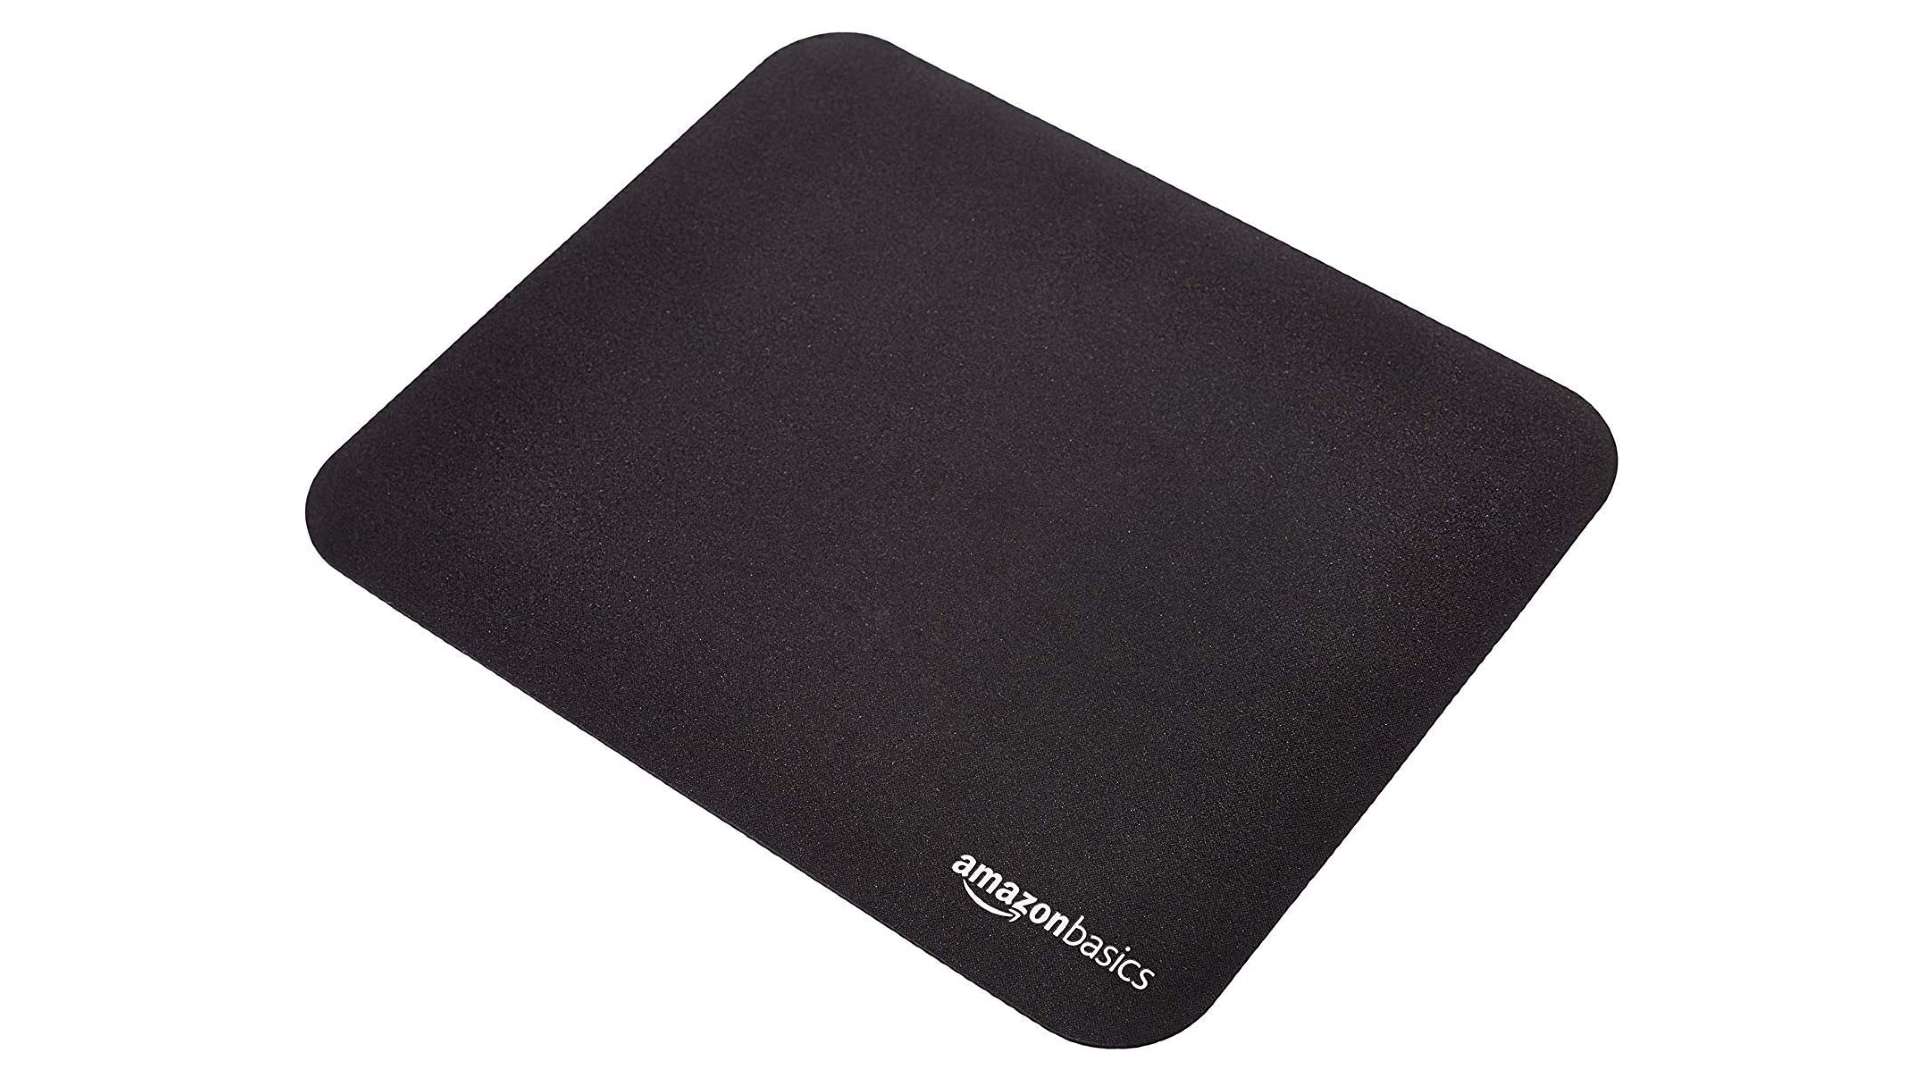 Small black mouse pad with white Amazon logo in bottom right corner